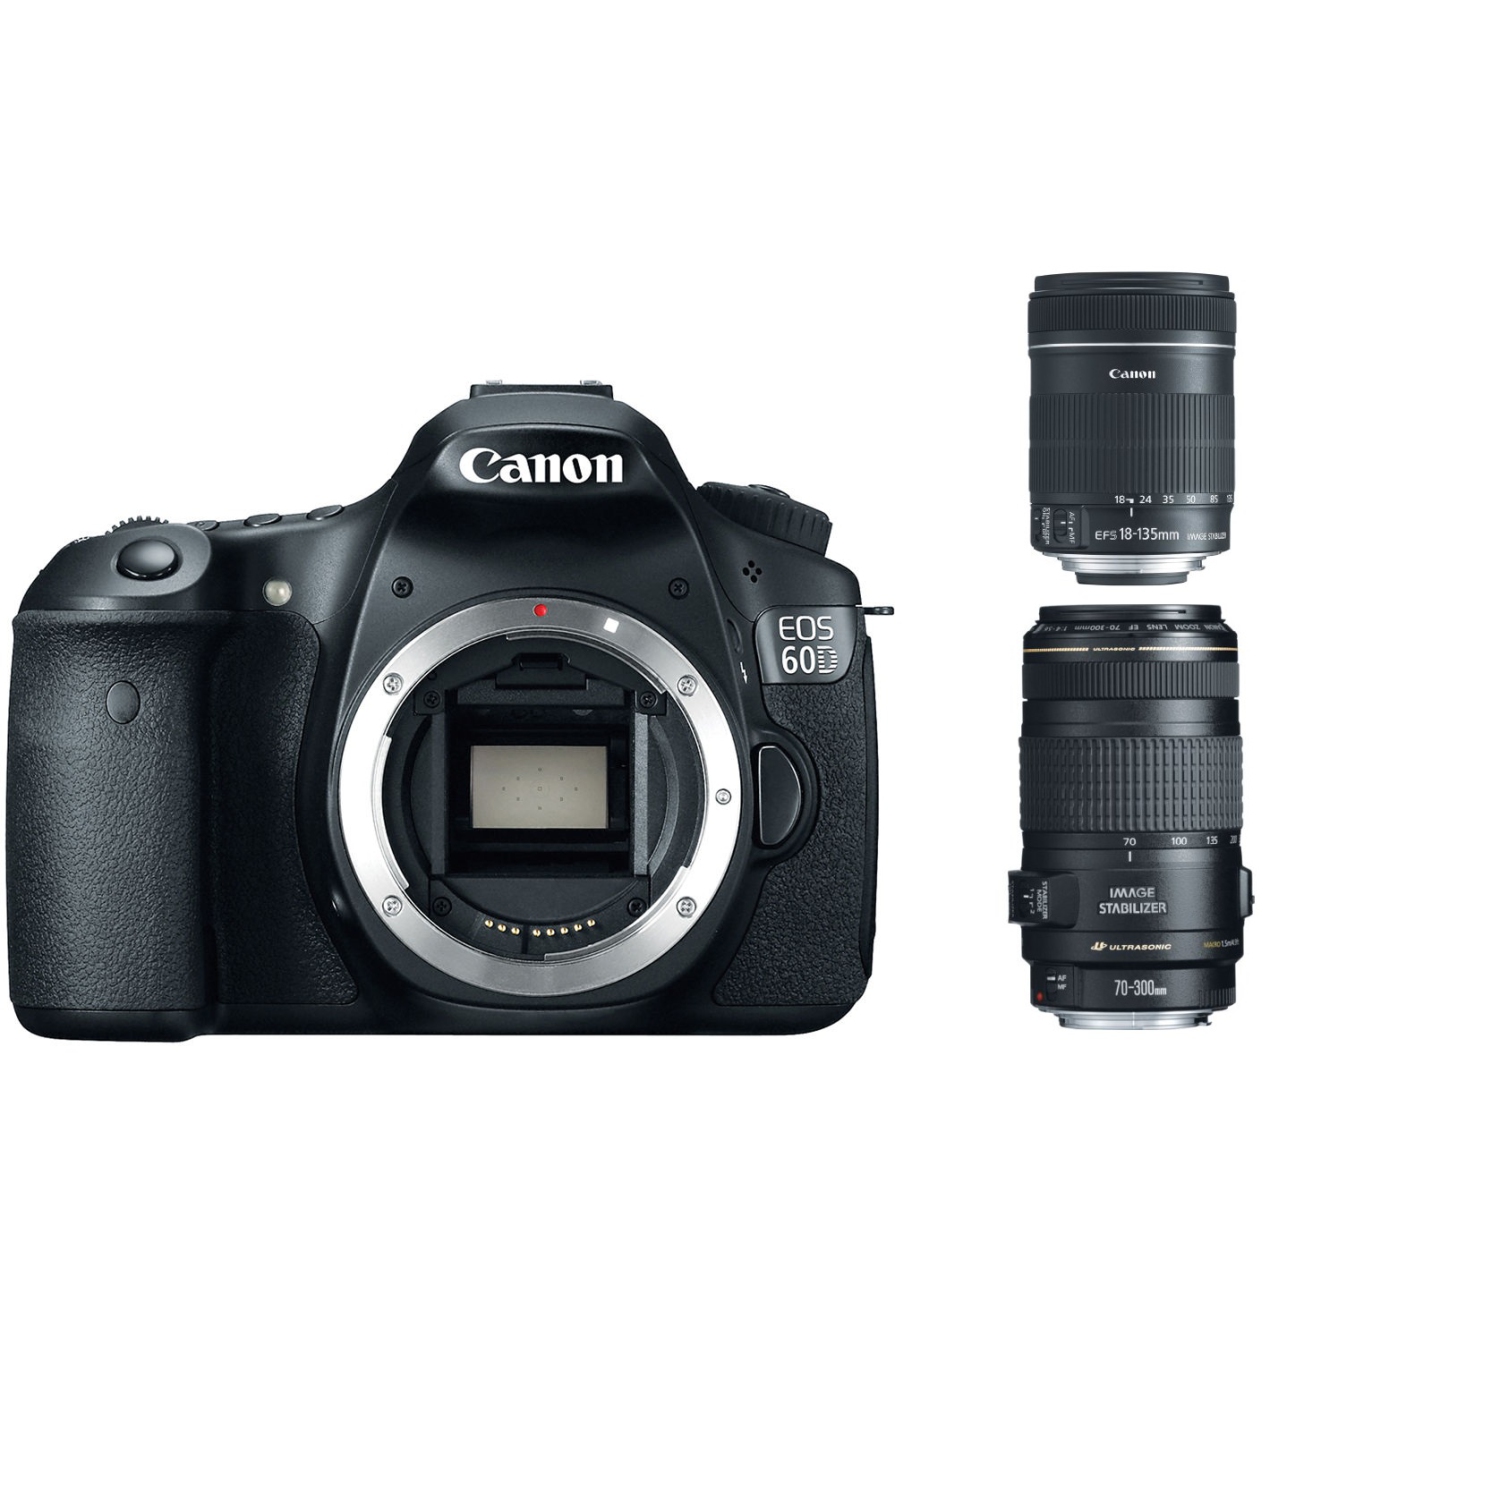 Canon EOS 60D DSLR Camera with 18-135mm and 70-300mm Lenses Kit - US Version w/ Seller Warranty